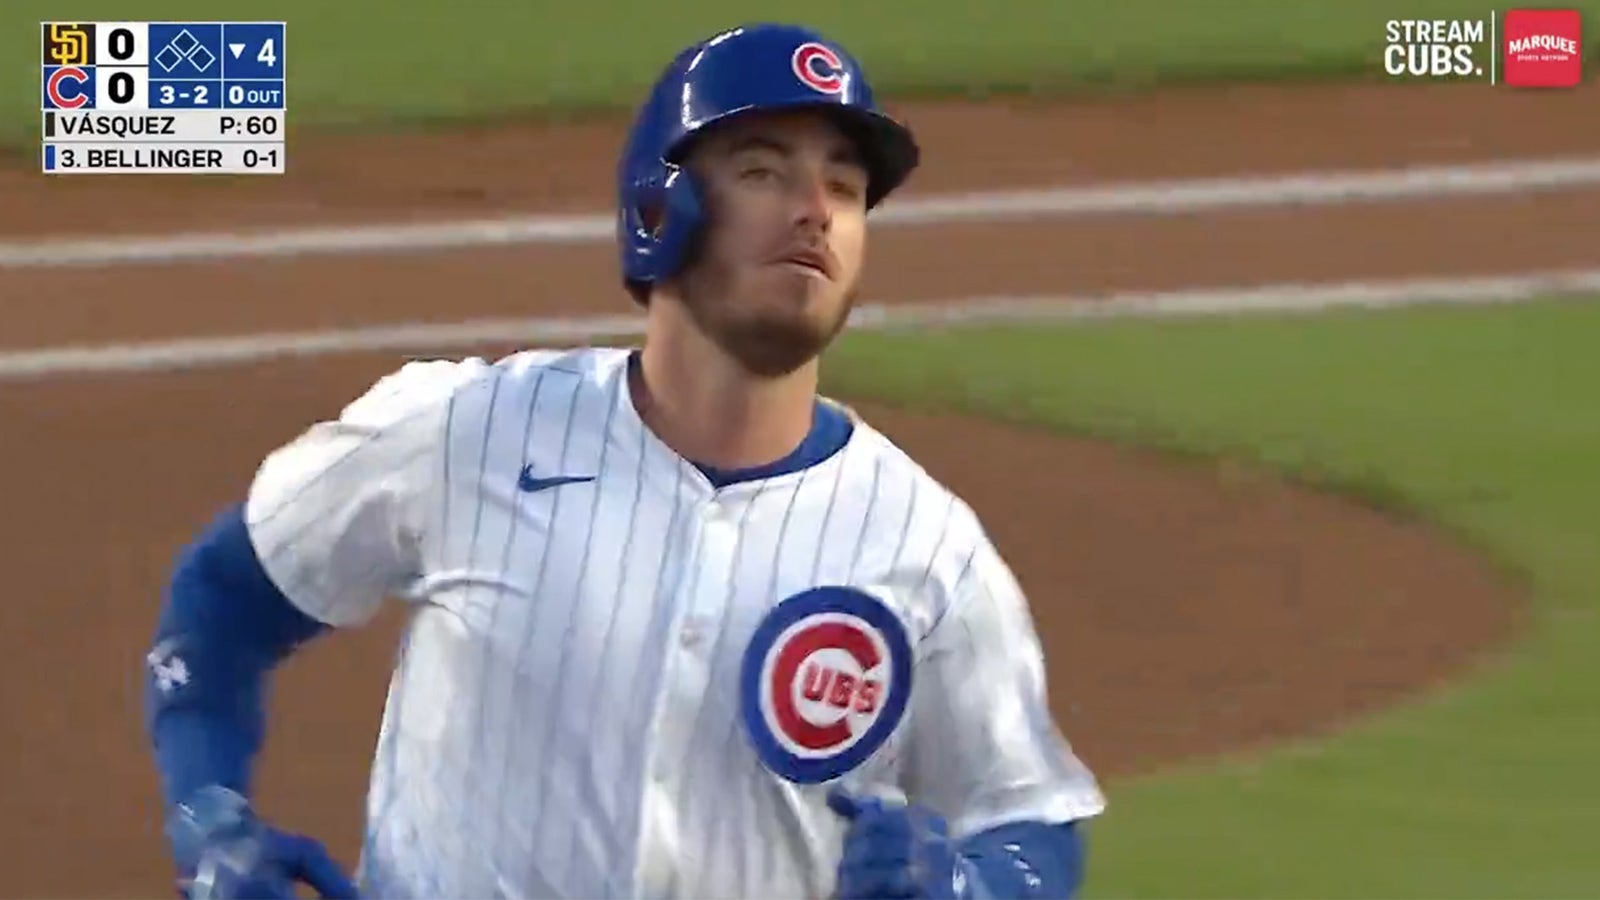 Cubs' Cody Bellinger hits a home run in his first game back from injured list